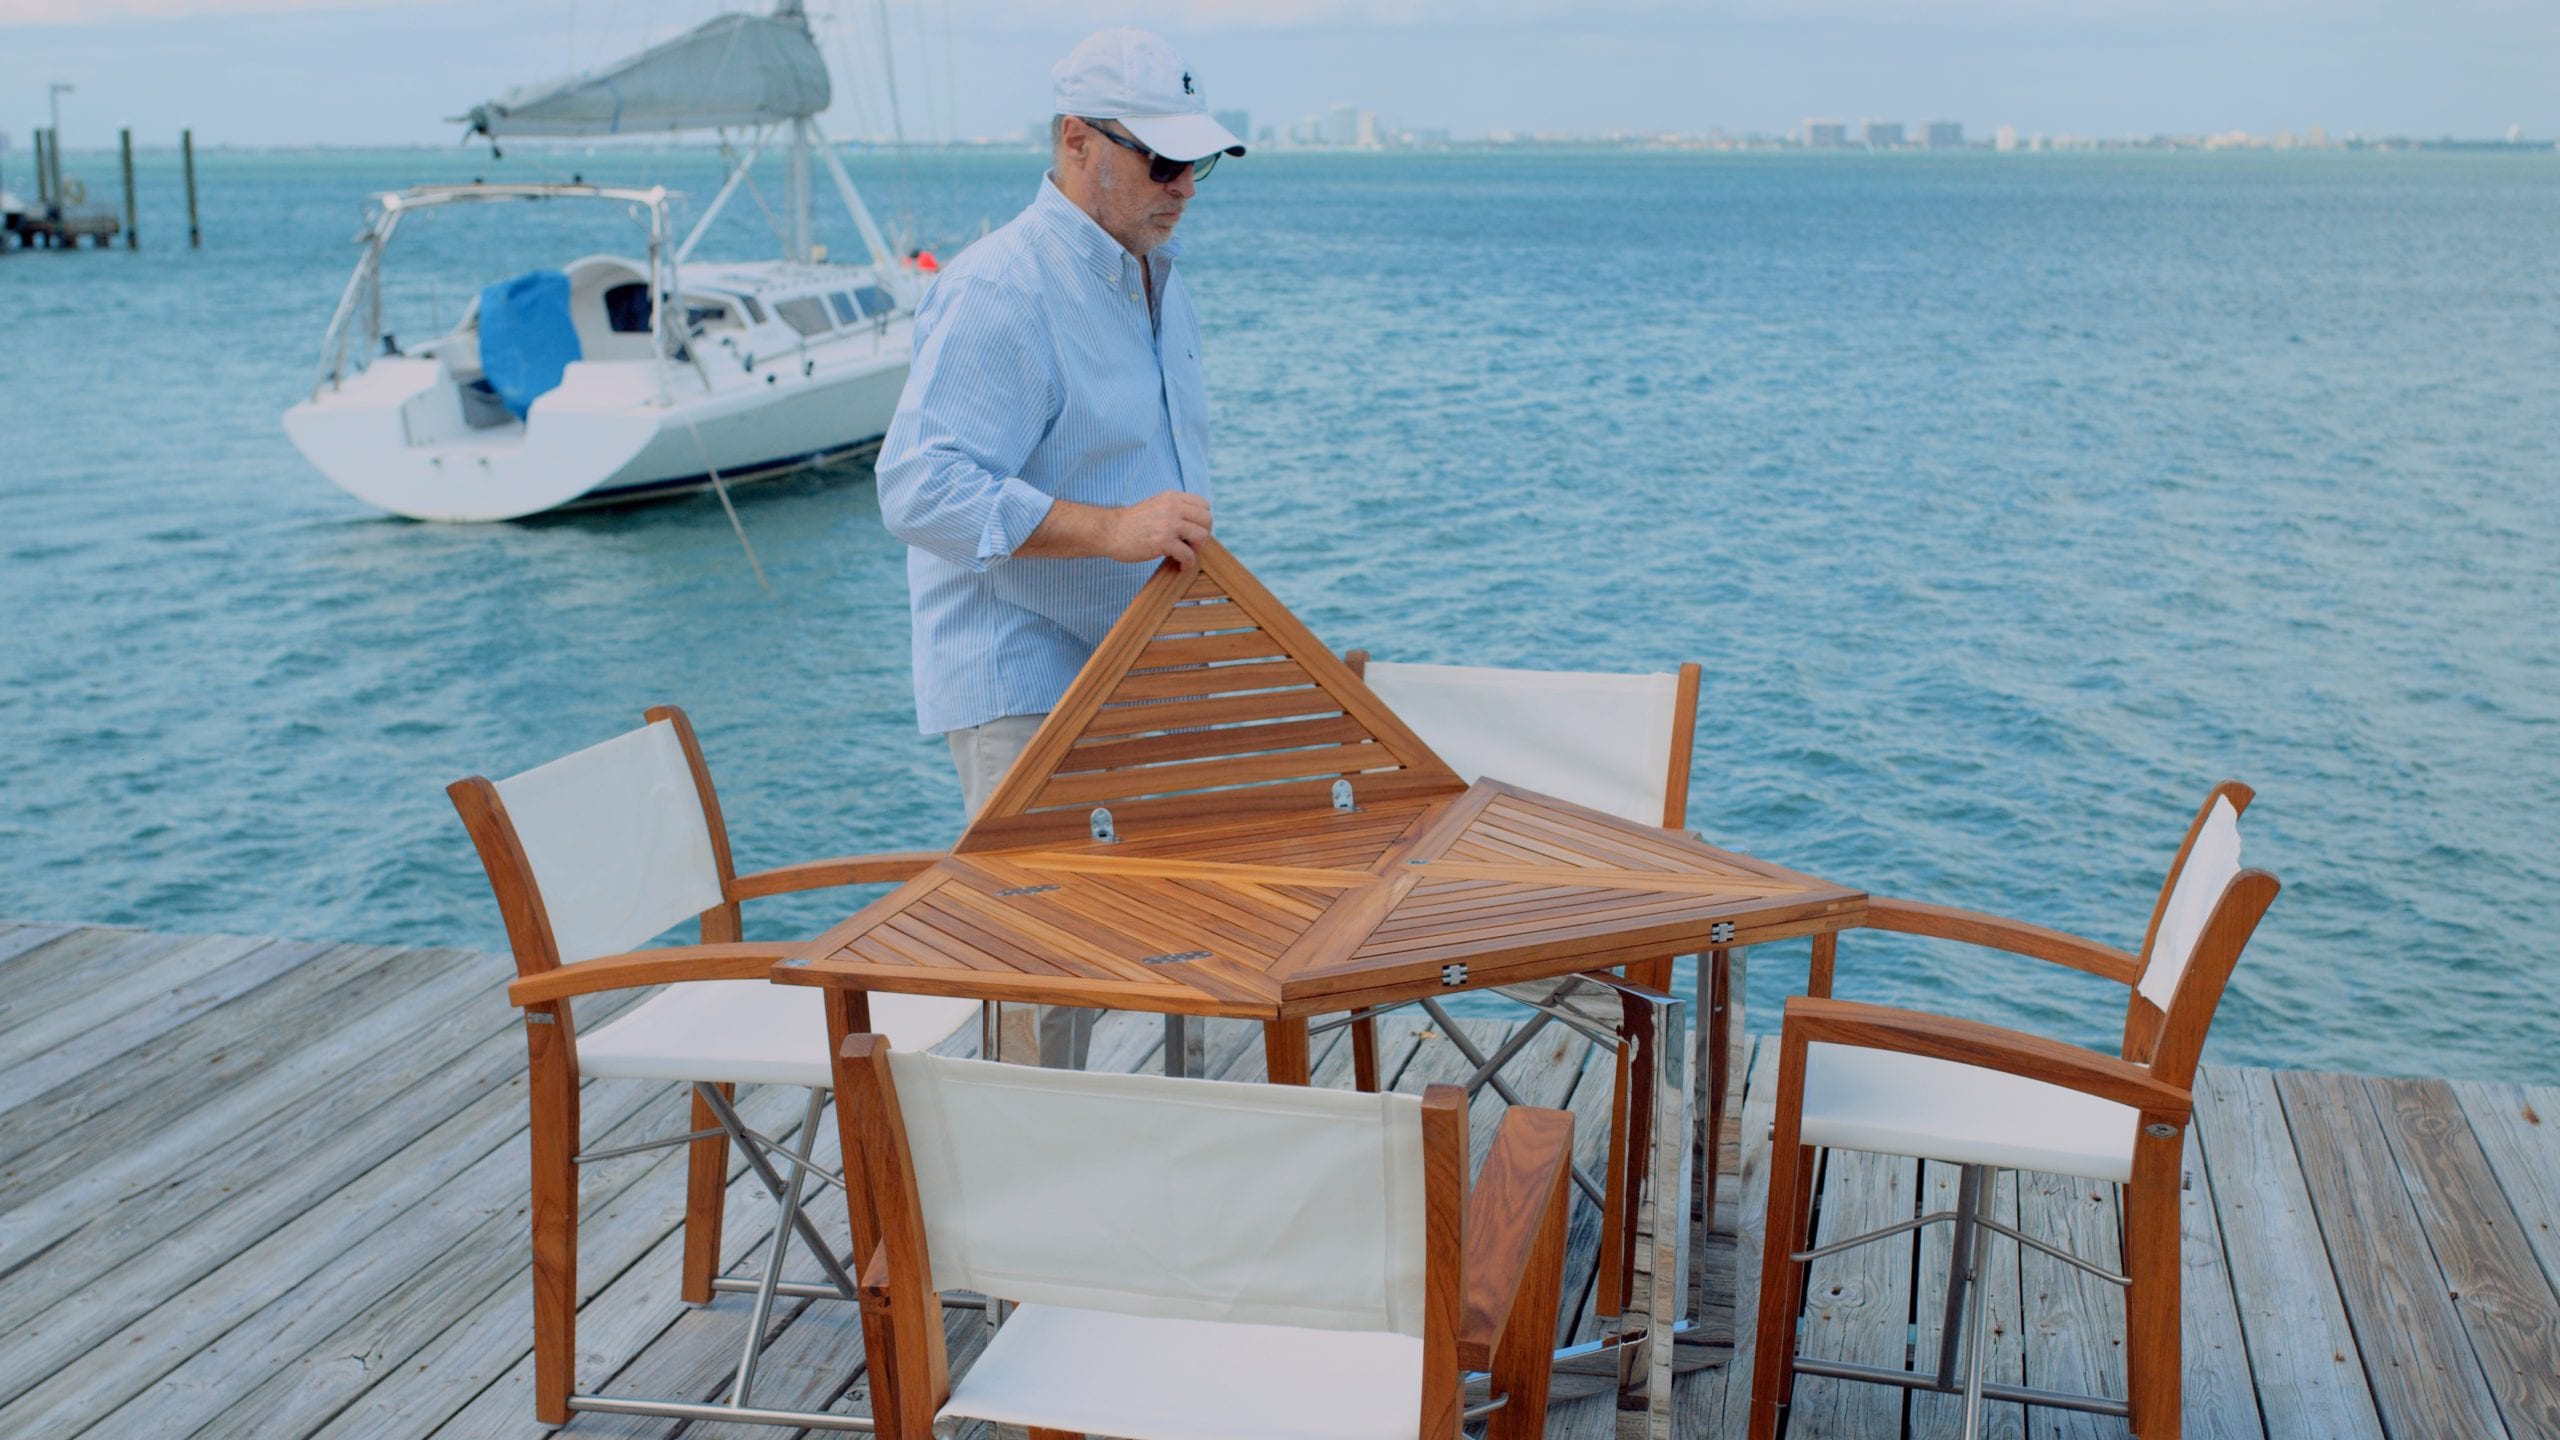 Man wearing white cap and light blue shirt setting up table and chairs on a pier with a boat in the background on the water